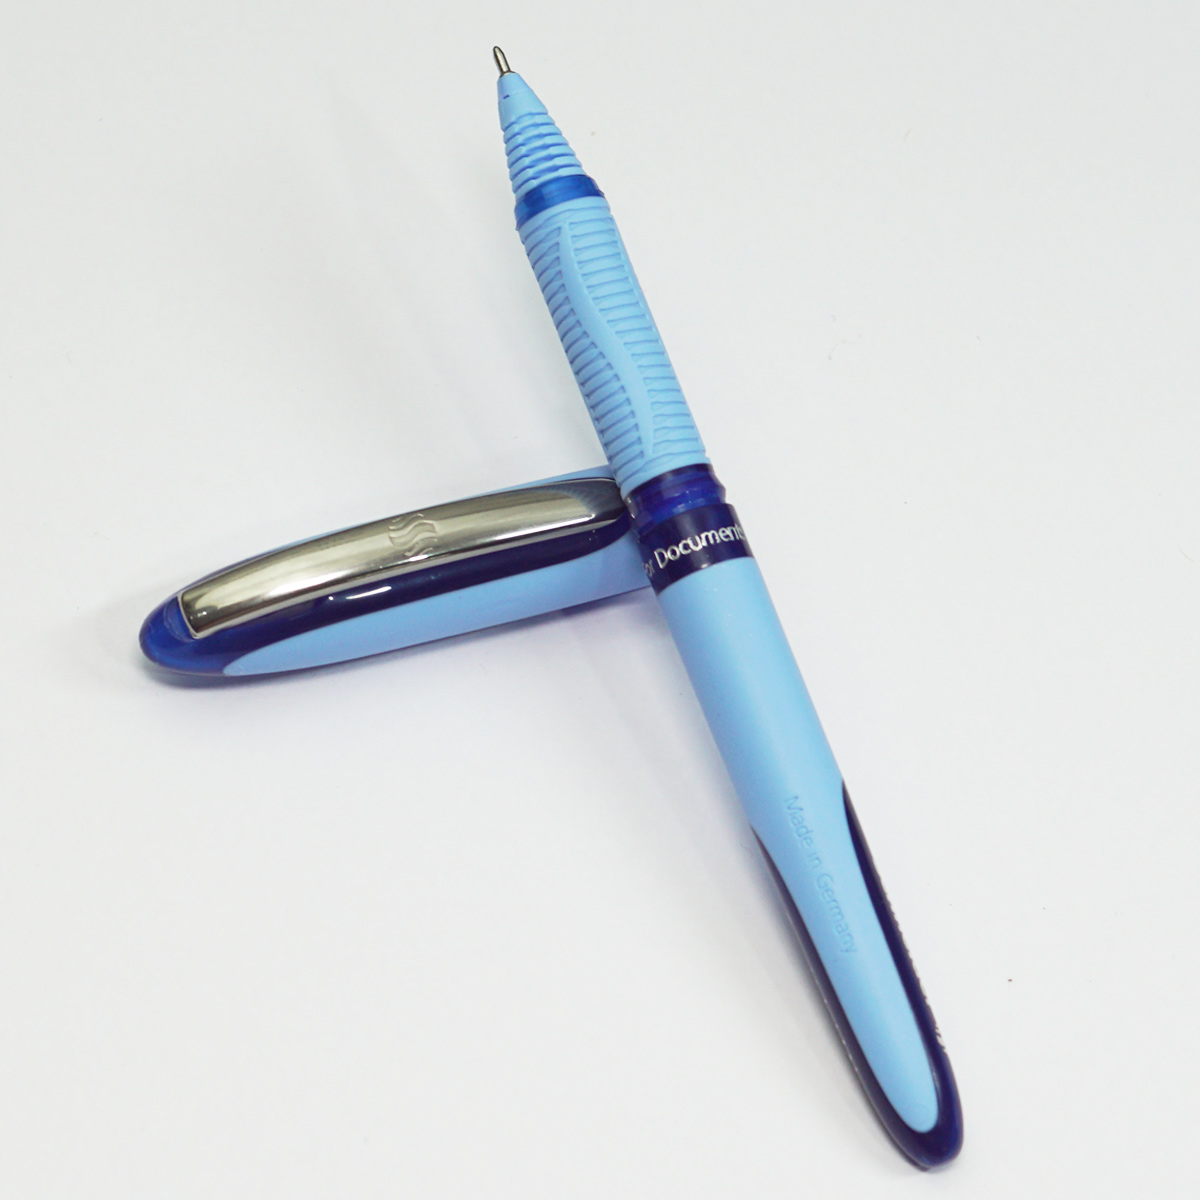 Schneider Blue Color Body With Silver Clip 0.5mm Needle Tip Blue Writing Rollerball Pen SKU 23294